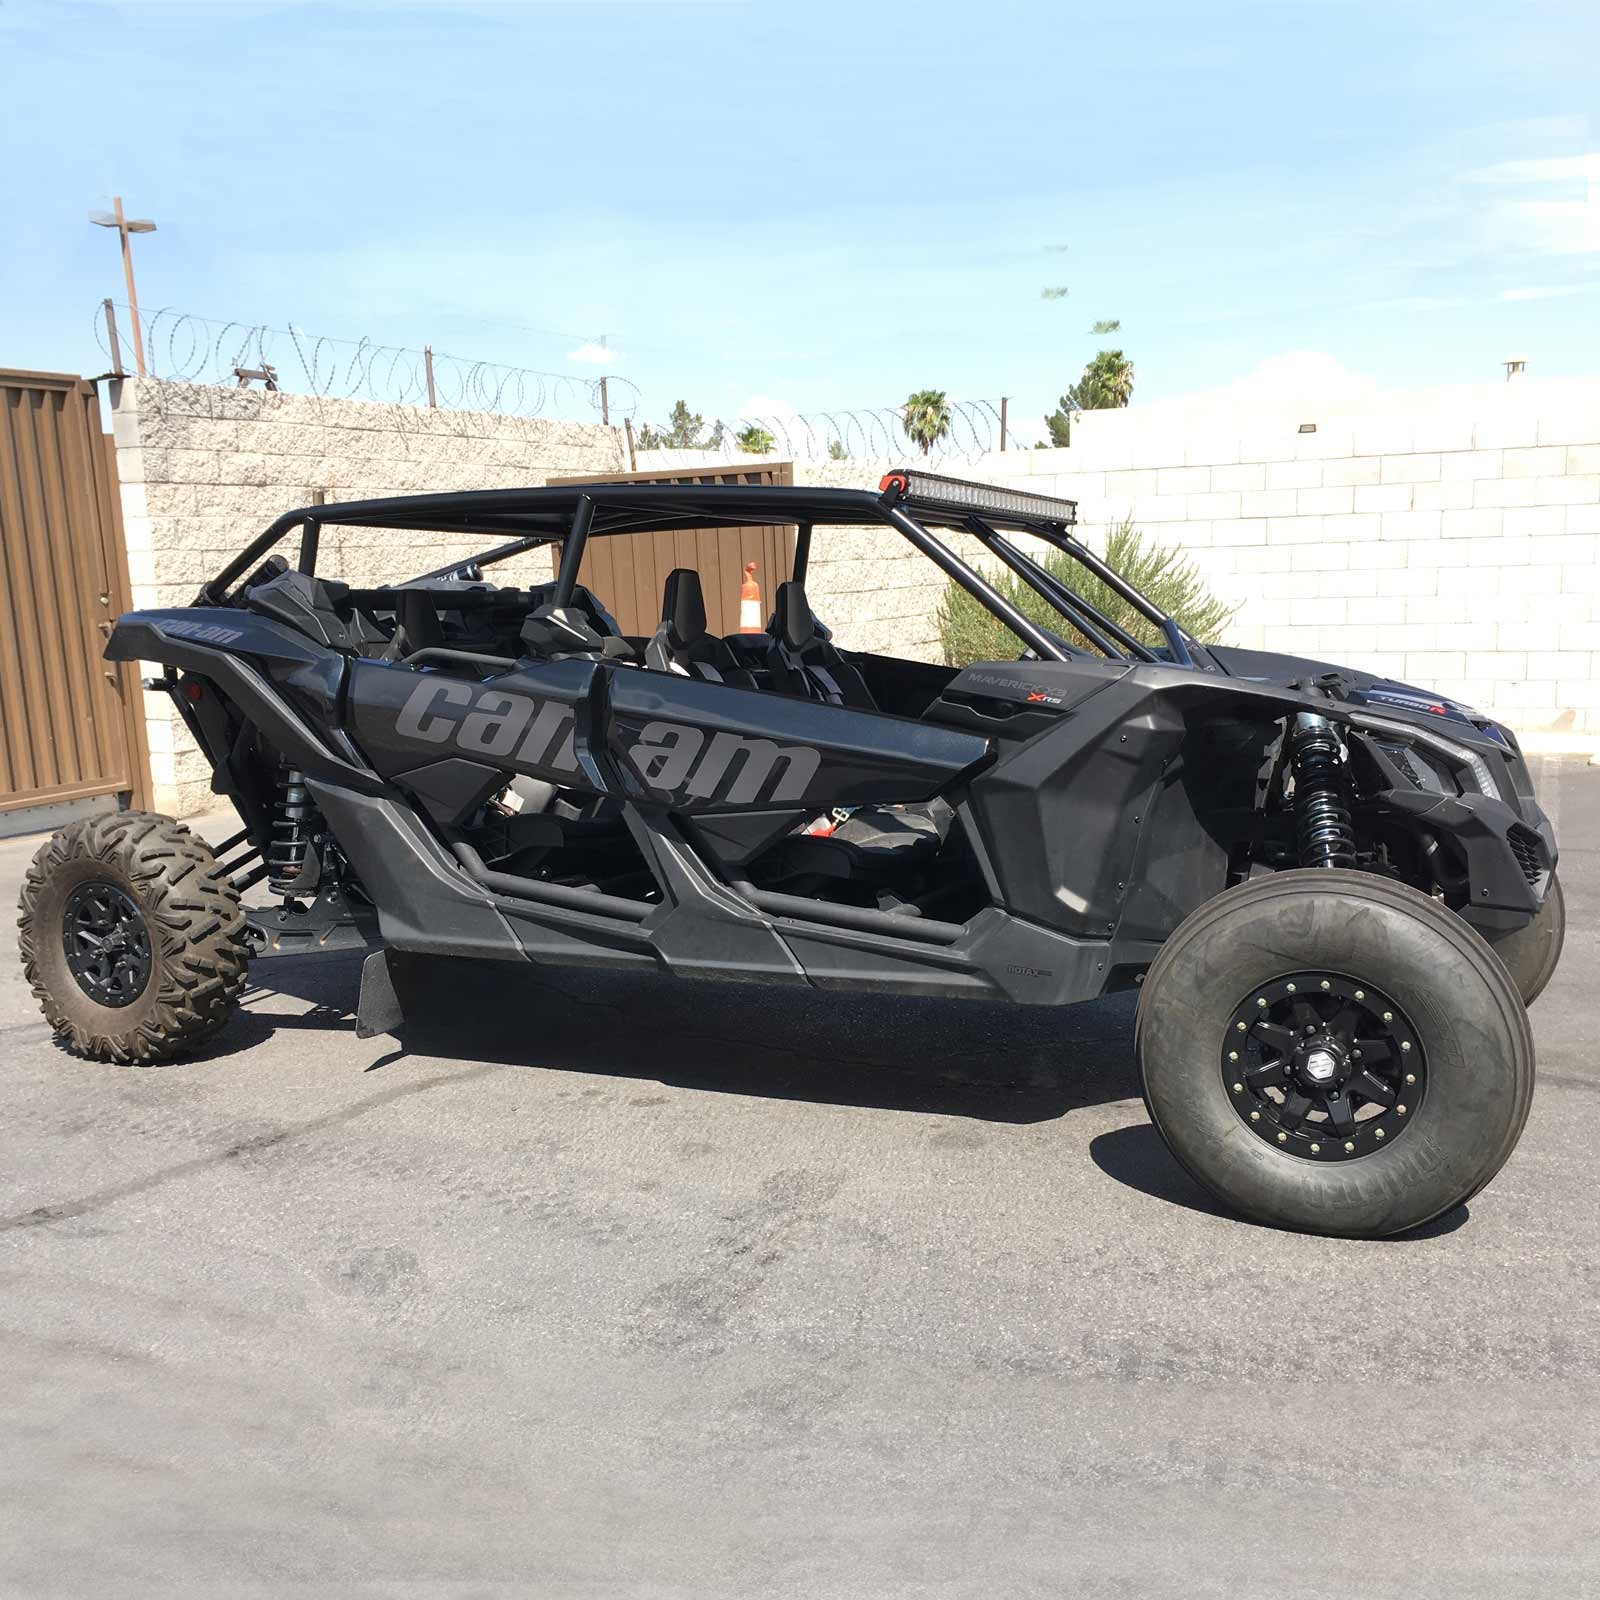 Can-am X3 Roll Cage Xrs 4 seater Pro Race Cage What Size Trailer For Can-am X3 4 Seater